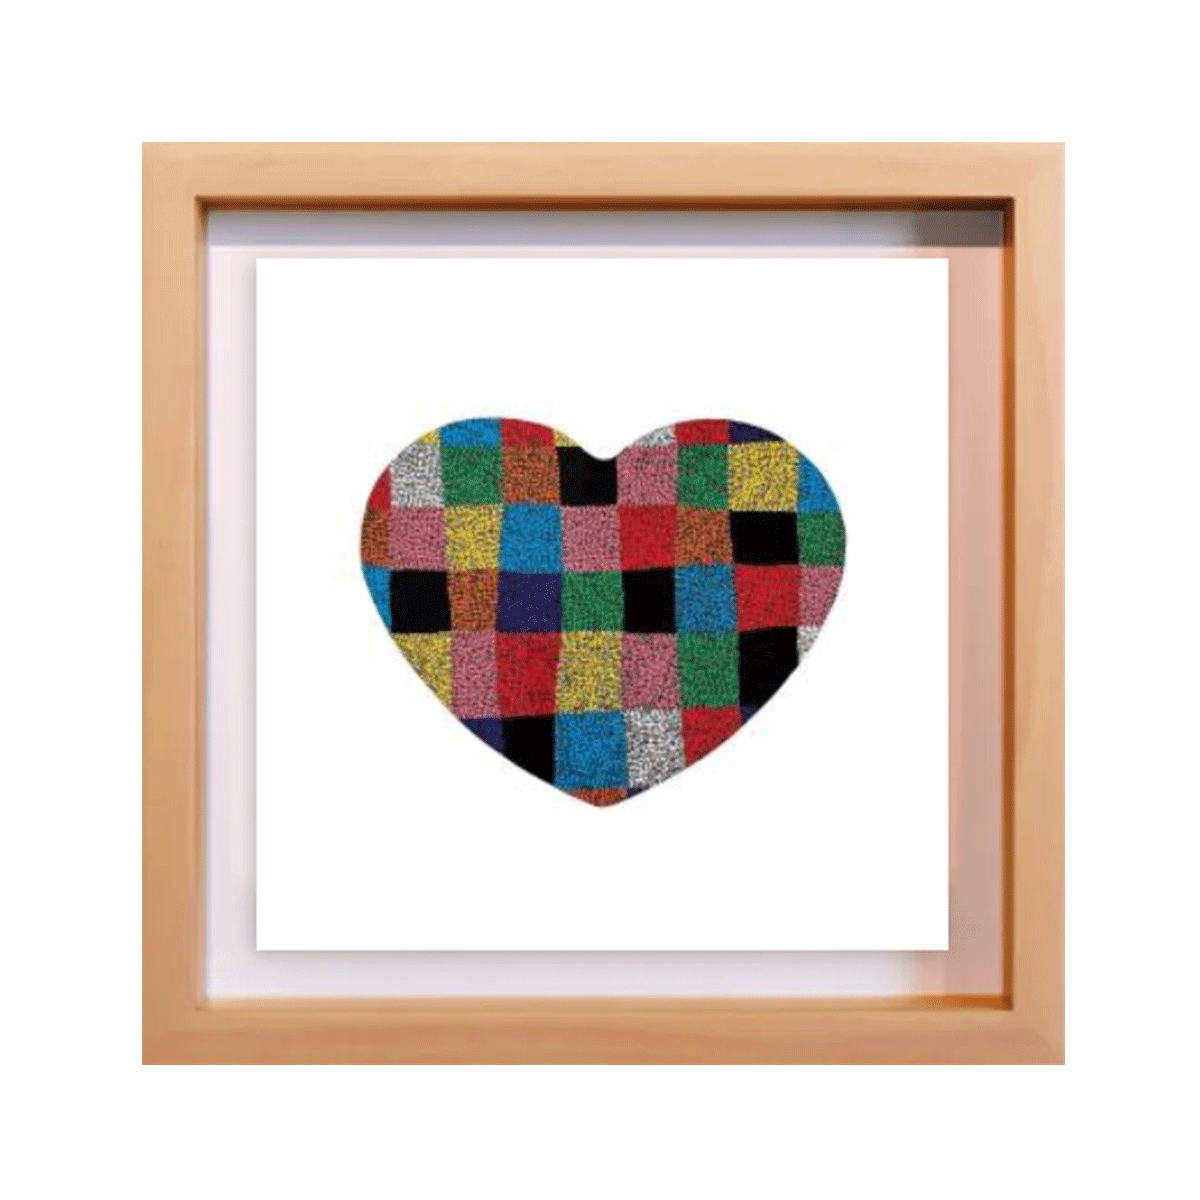 Patchwork Heart 1 / アート